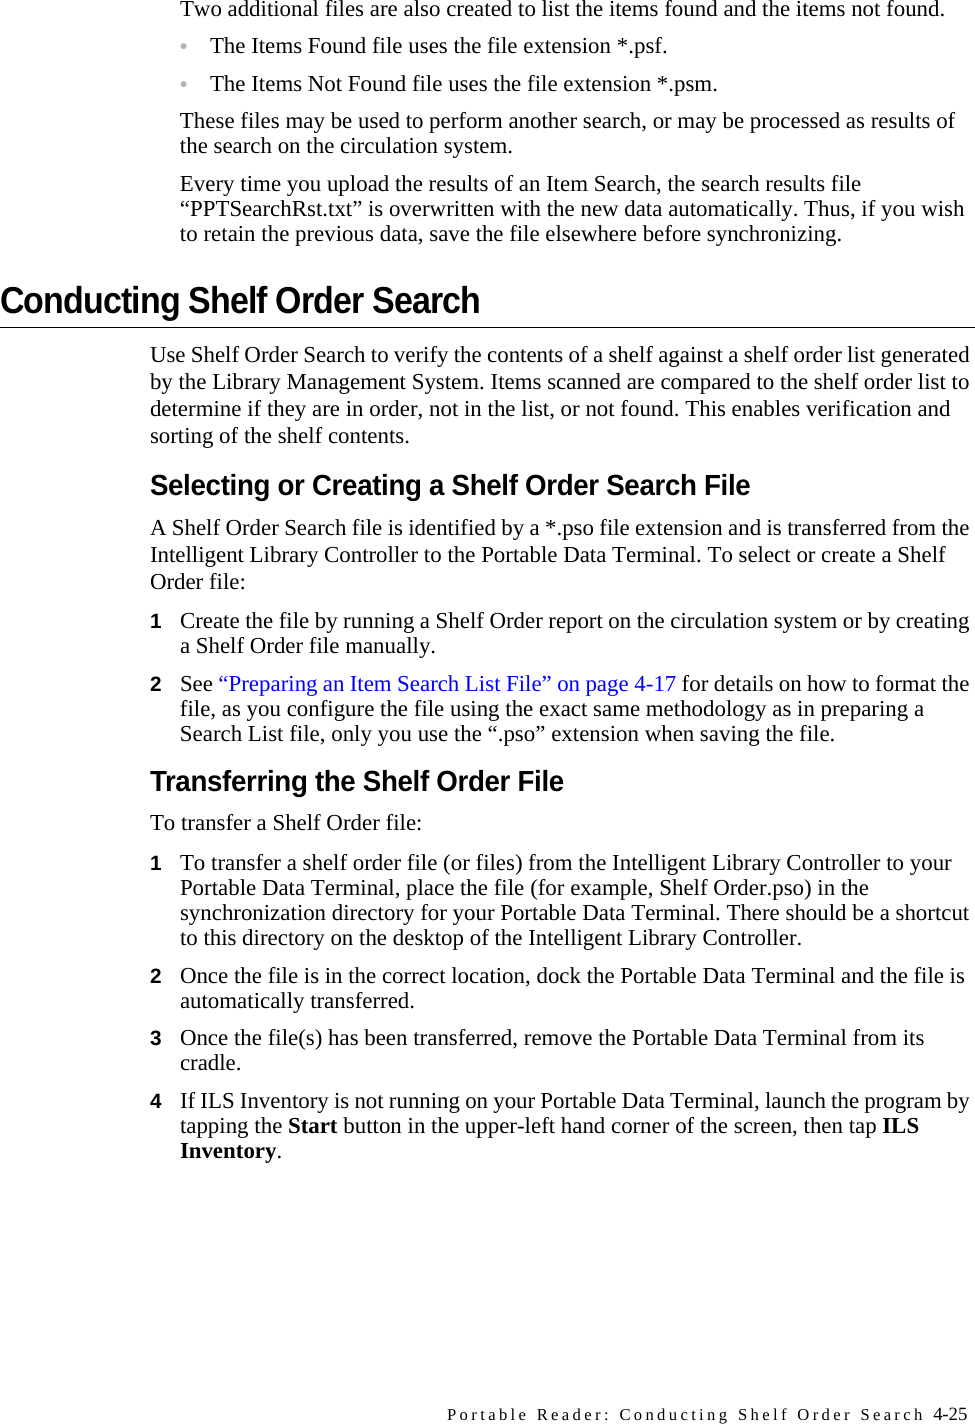 Portable Reader: Conducting Shelf Order Search 4-25Two additional files are also created to list the items found and the items not found. •The Items Found file uses the file extension *.psf. •The Items Not Found file uses the file extension *.psm. These files may be used to perform another search, or may be processed as results of the search on the circulation system.Every time you upload the results of an Item Search, the search results file “PPTSearchRst.txt” is overwritten with the new data automatically. Thus, if you wish to retain the previous data, save the file elsewhere before synchronizing.Conducting Shelf Order SearchUse Shelf Order Search to verify the contents of a shelf against a shelf order list generated by the Library Management System. Items scanned are compared to the shelf order list to determine if they are in order, not in the list, or not found. This enables verification and sorting of the shelf contents. Selecting or Creating a Shelf Order Search FileA Shelf Order Search file is identified by a *.pso file extension and is transferred from the Intelligent Library Controller to the Portable Data Terminal. To select or create a Shelf Order file:1Create the file by running a Shelf Order report on the circulation system or by creating a Shelf Order file manually. 2See “Preparing an Item Search List File” on page 4-17 for details on how to format the file, as you configure the file using the exact same methodology as in preparing a Search List file, only you use the “.pso” extension when saving the file. Transferring the Shelf Order FileTo transfer a Shelf Order file:1To transfer a shelf order file (or files) from the Intelligent Library Controller to your Portable Data Terminal, place the file (for example, Shelf Order.pso) in the synchronization directory for your Portable Data Terminal. There should be a shortcut to this directory on the desktop of the Intelligent Library Controller. 2Once the file is in the correct location, dock the Portable Data Terminal and the file is automatically transferred. 3Once the file(s) has been transferred, remove the Portable Data Terminal from its cradle.4If ILS Inventory is not running on your Portable Data Terminal, launch the program by tapping the Start button in the upper-left hand corner of the screen, then tap ILS Inventory.